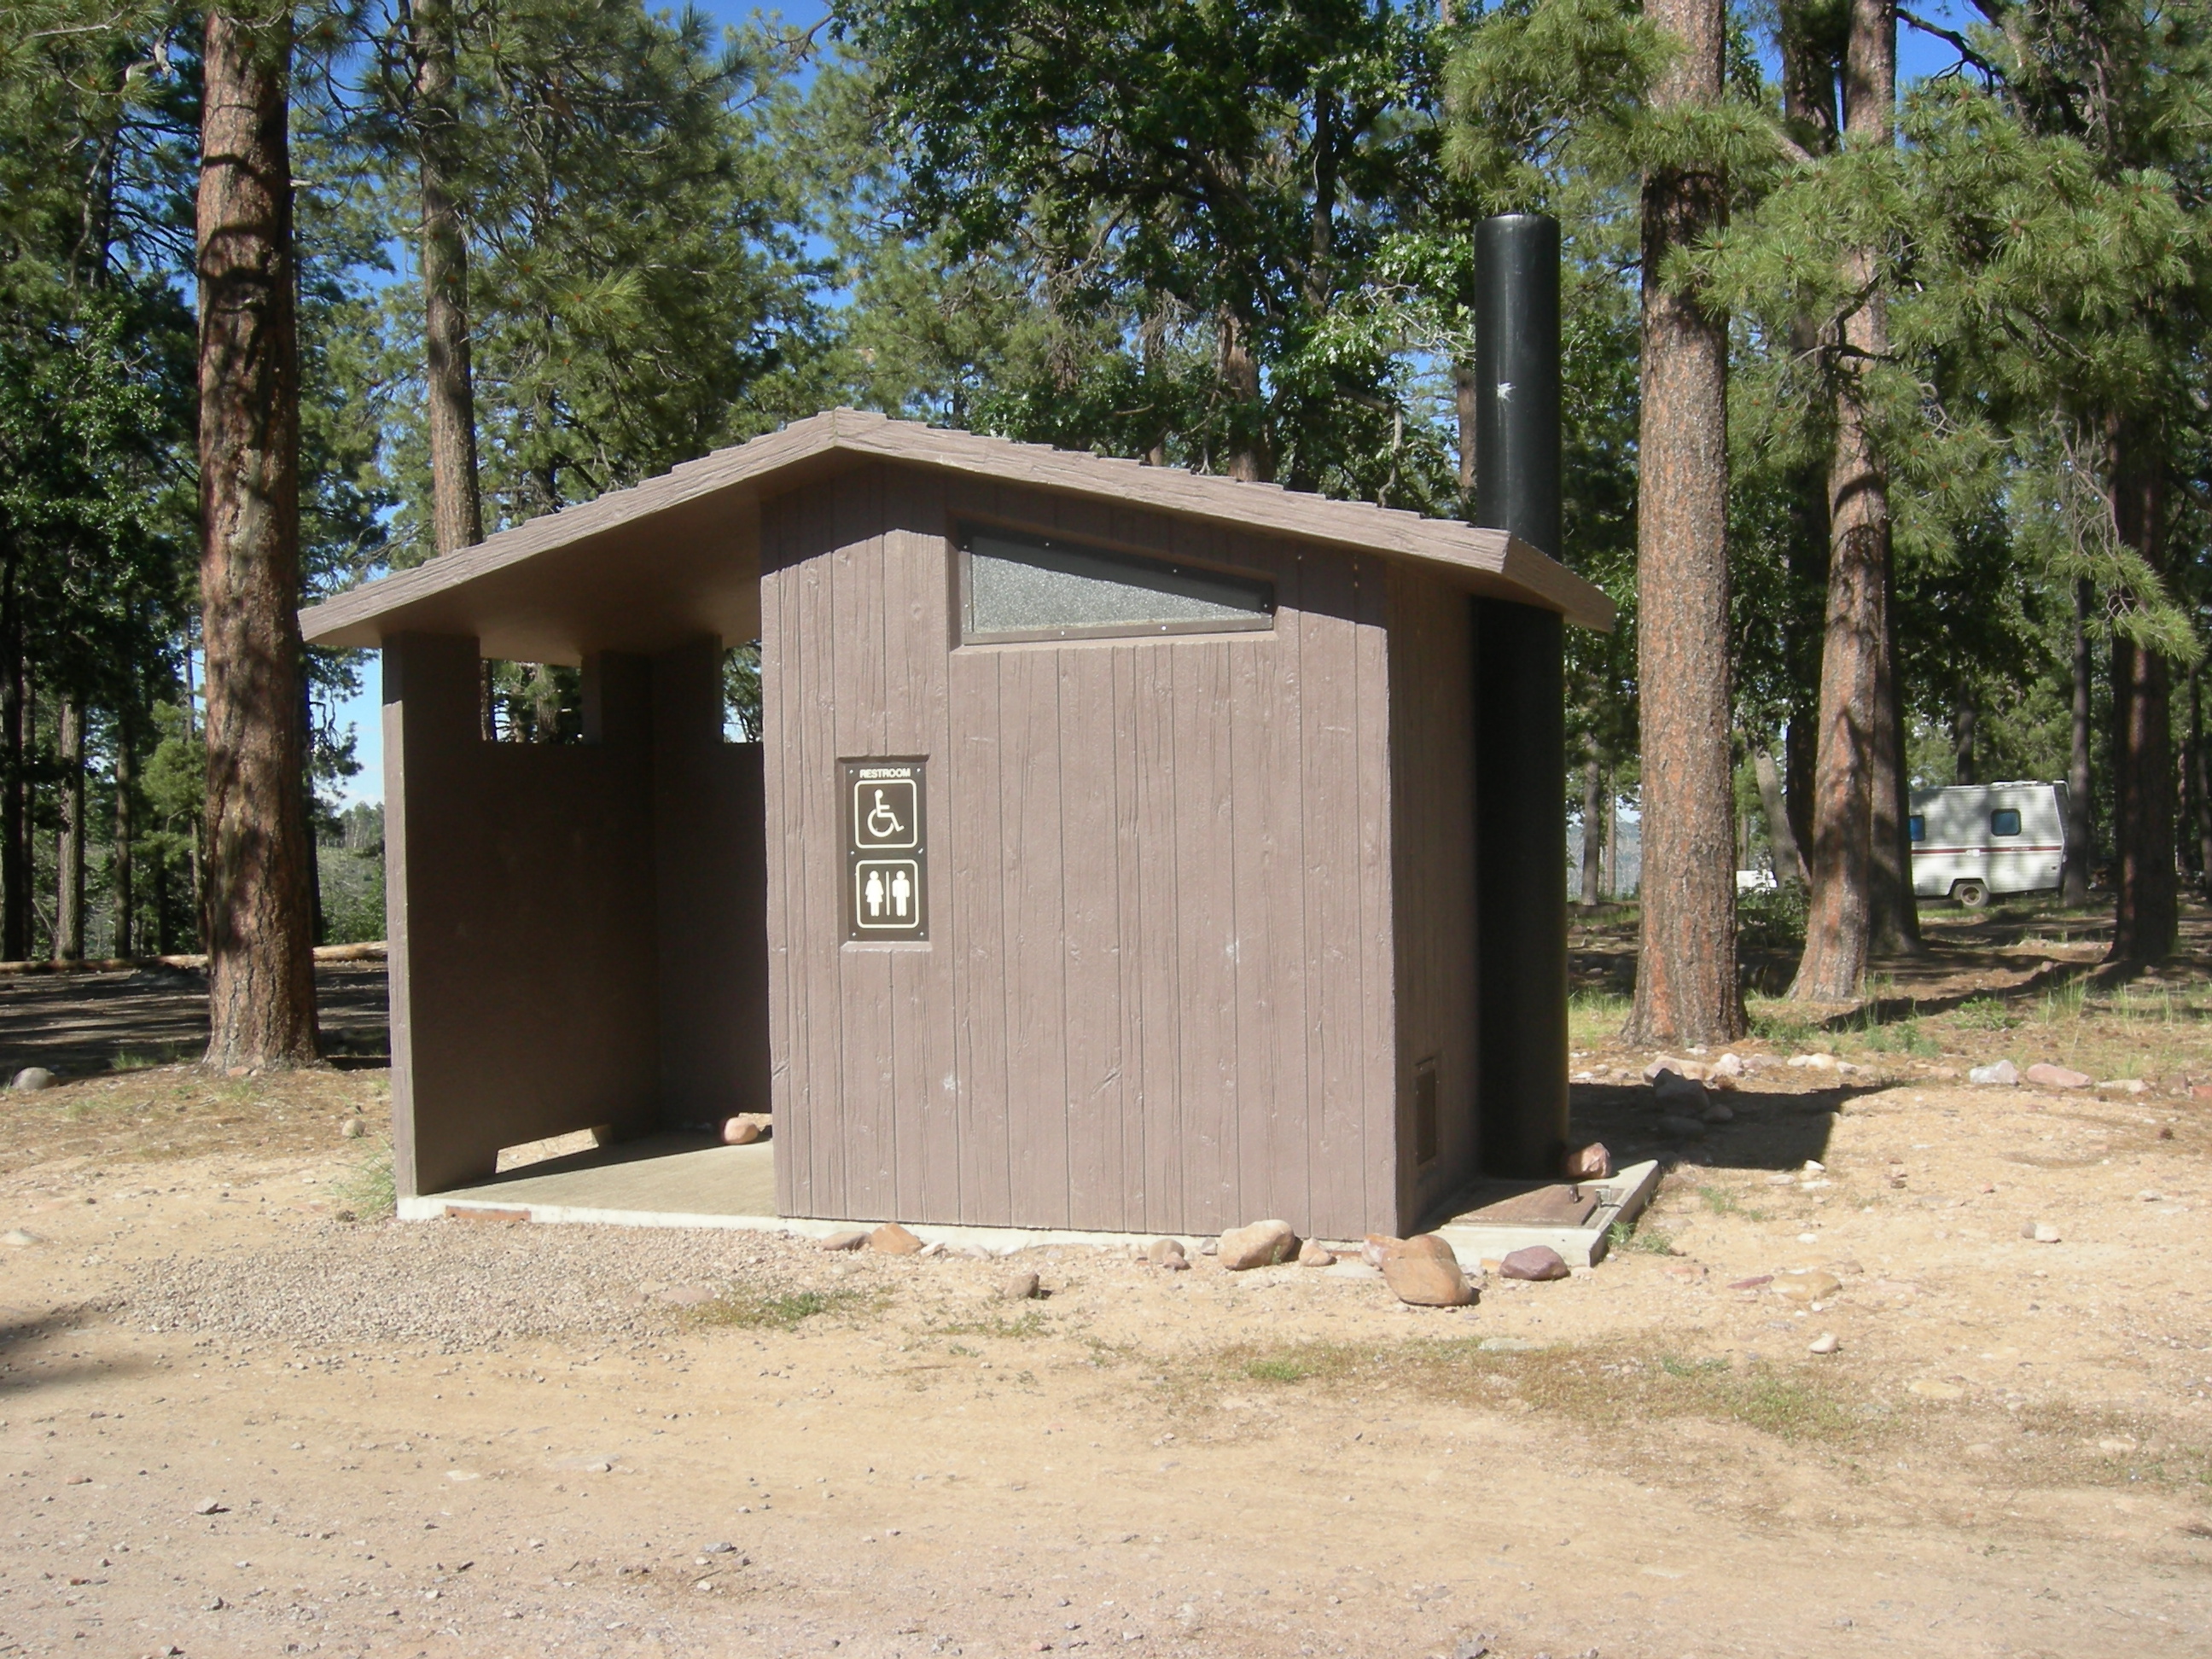 Restrooms at Upper Canyon Creek Campground